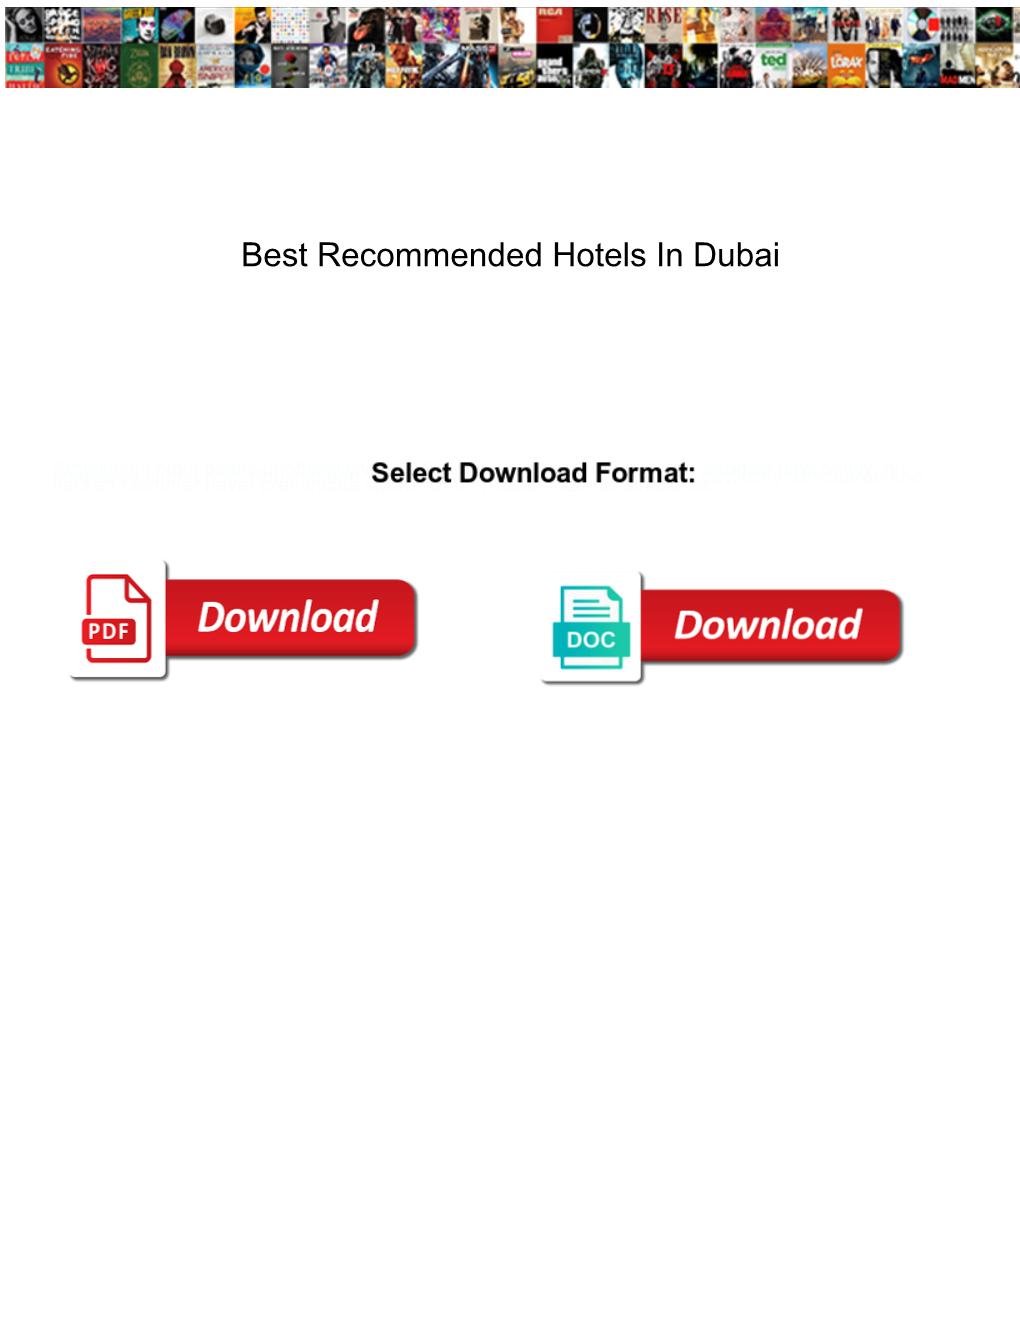 Best Recommended Hotels in Dubai